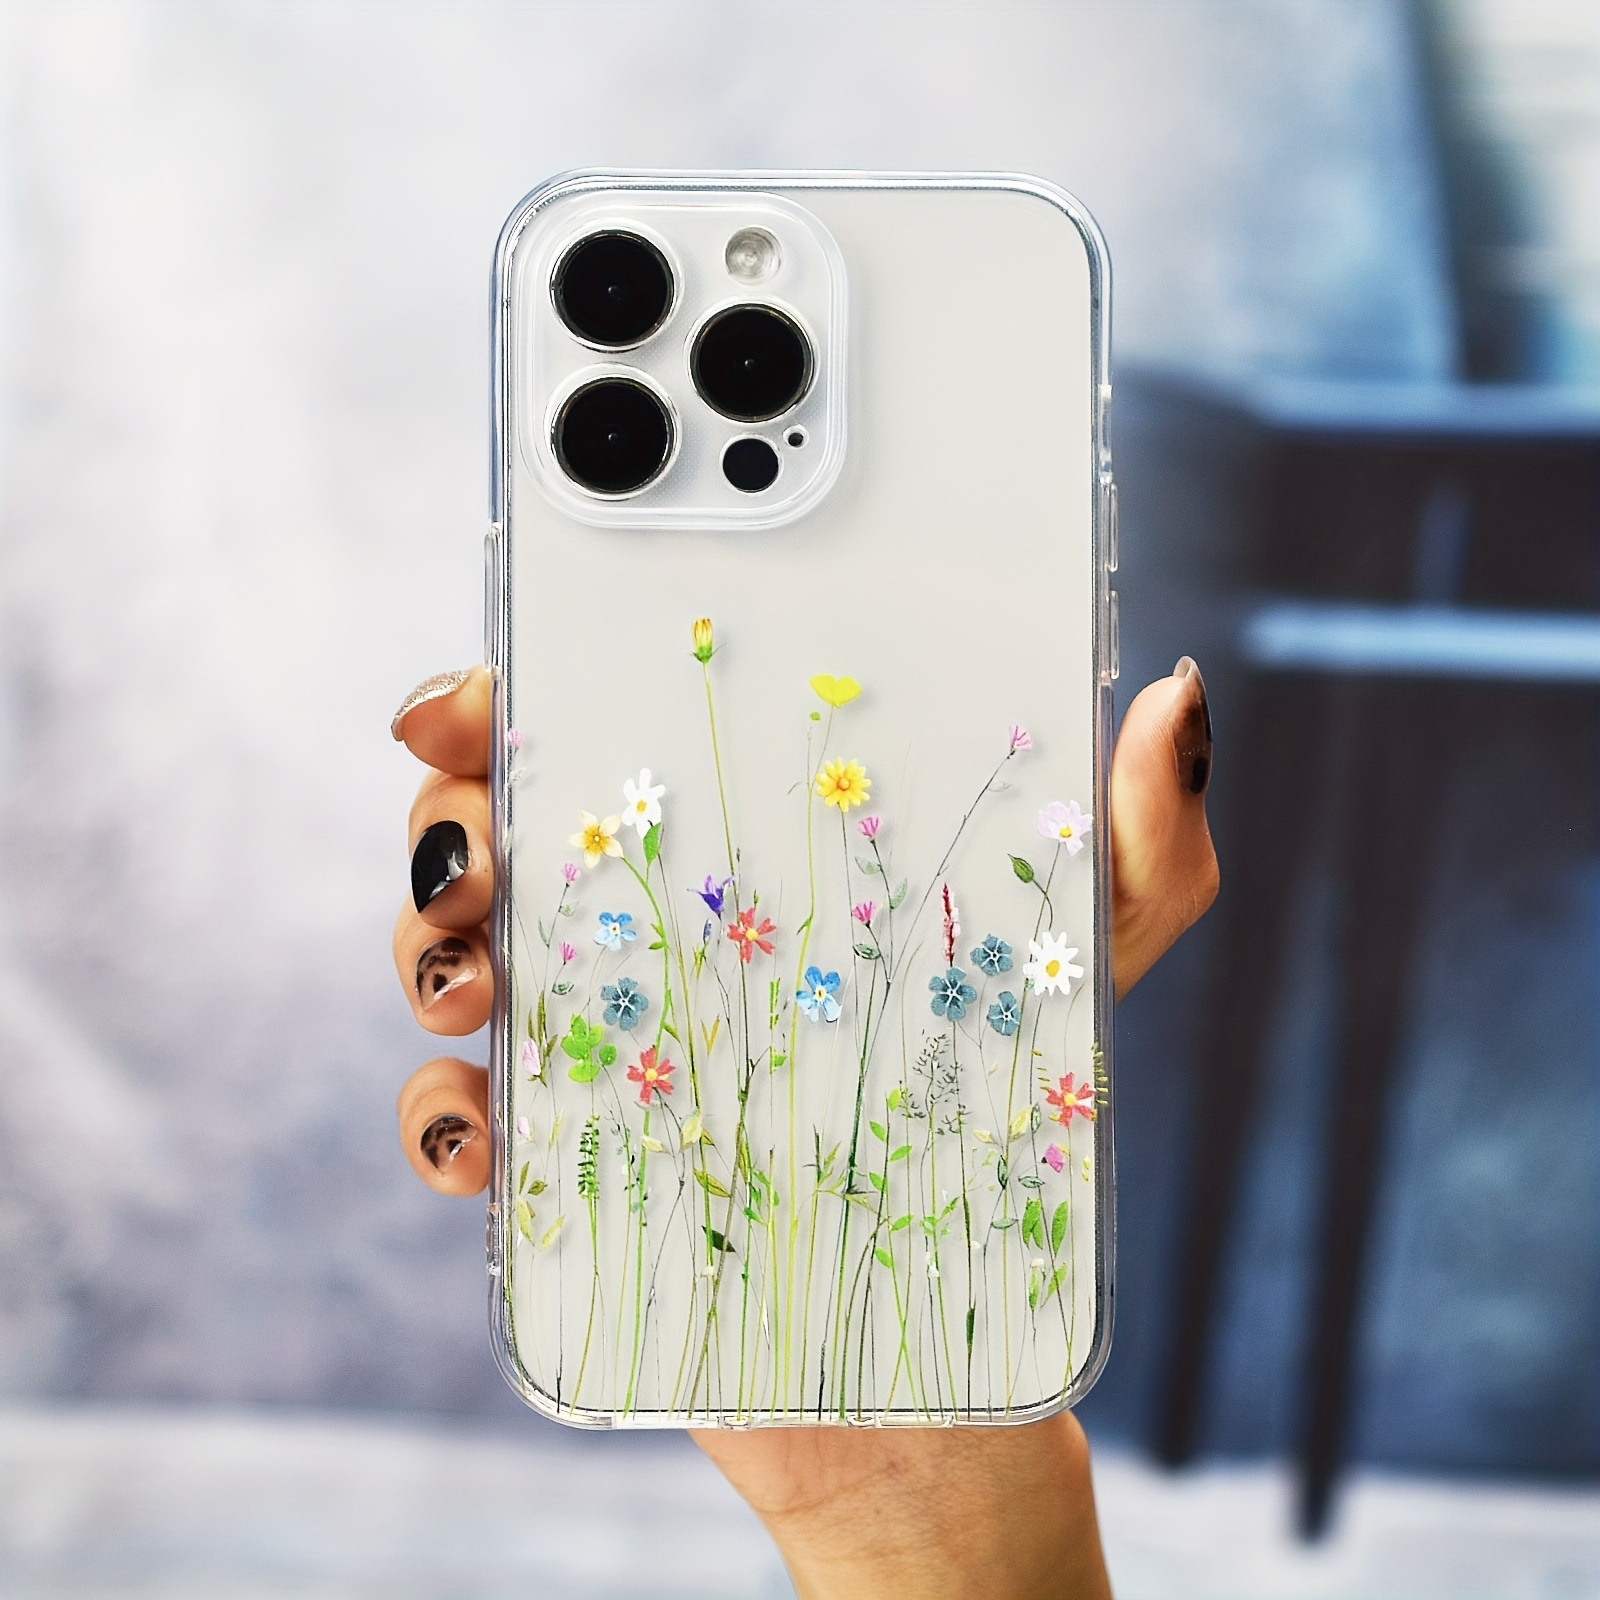 

Durable Shockproof Protective Phone Case With Flowers & Plants Pattern Design - For Iphone 7/8/11/12/13/14/x/xr/xs/plus/pro/pro Max/se2/mini Series - Perfect All-round Protection For Women & Girls